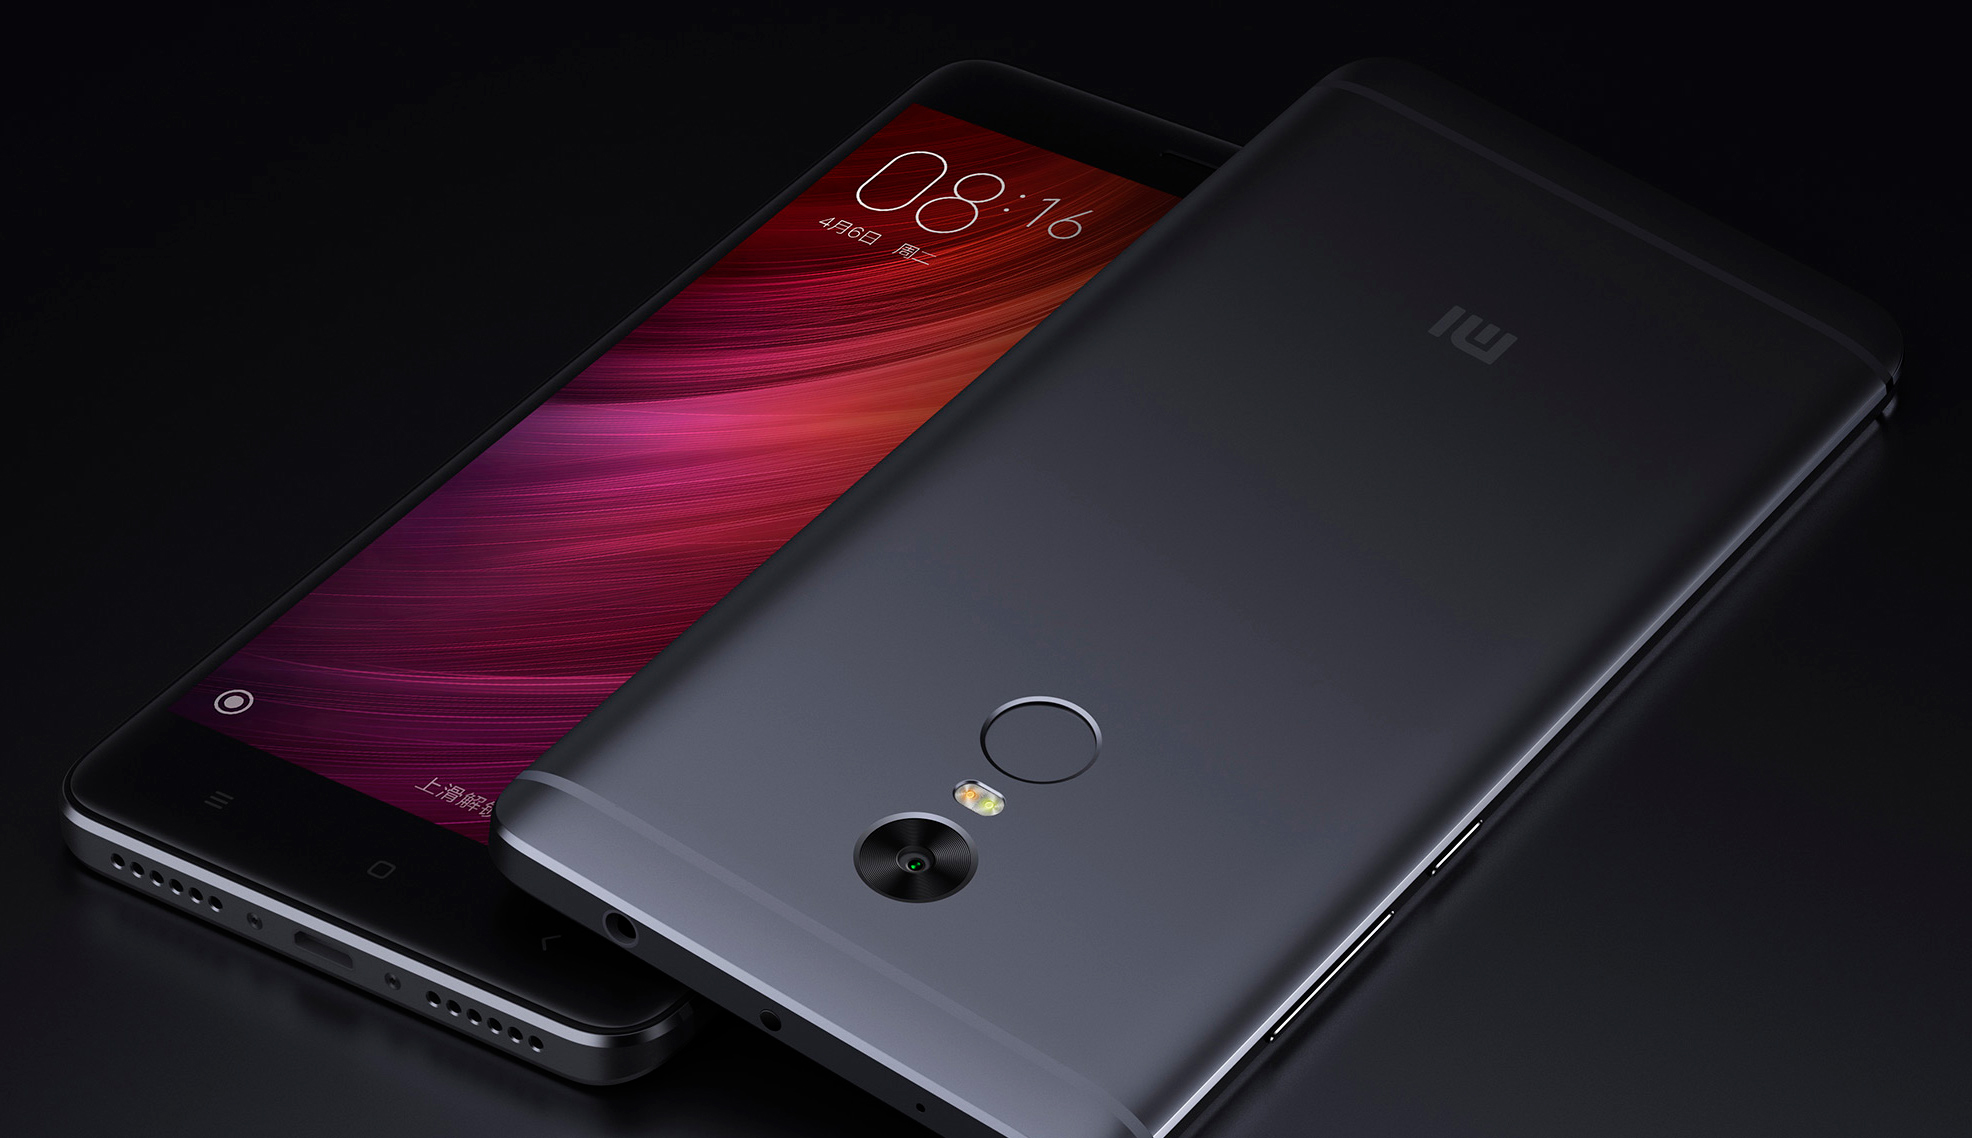 Ru xiaomi redmi 4. Xiaomi Note 4. Xiaomi Redmi Note 4x. Смартфон Xiaomi Redmi Note 4. Xiaomi Redmi Note 4 4/64gb.